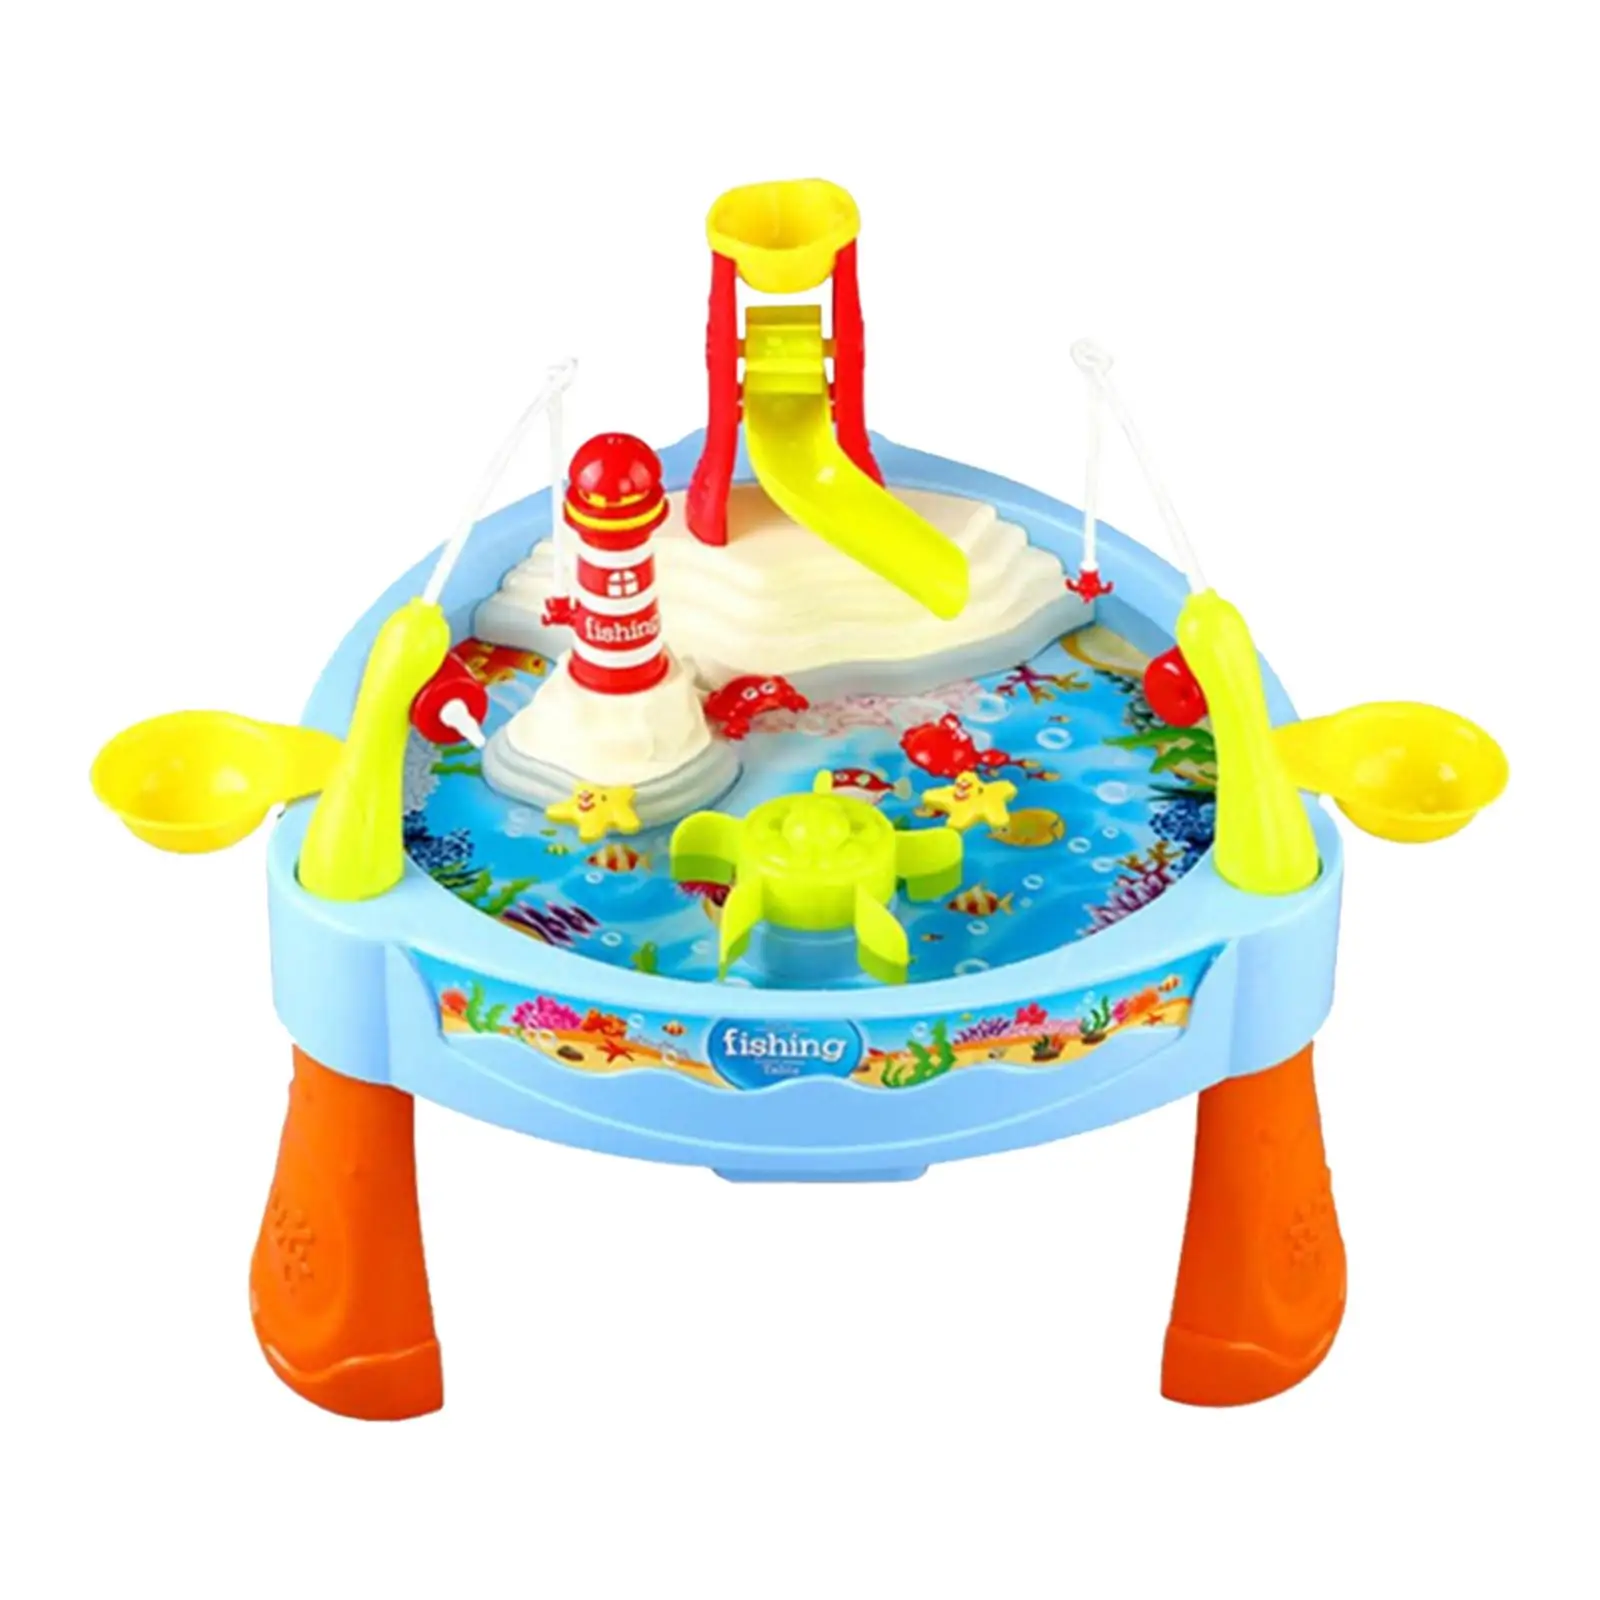 Kids Sand Water Table Toys Electronic Toy Fishing Set for Beach Outside Kids